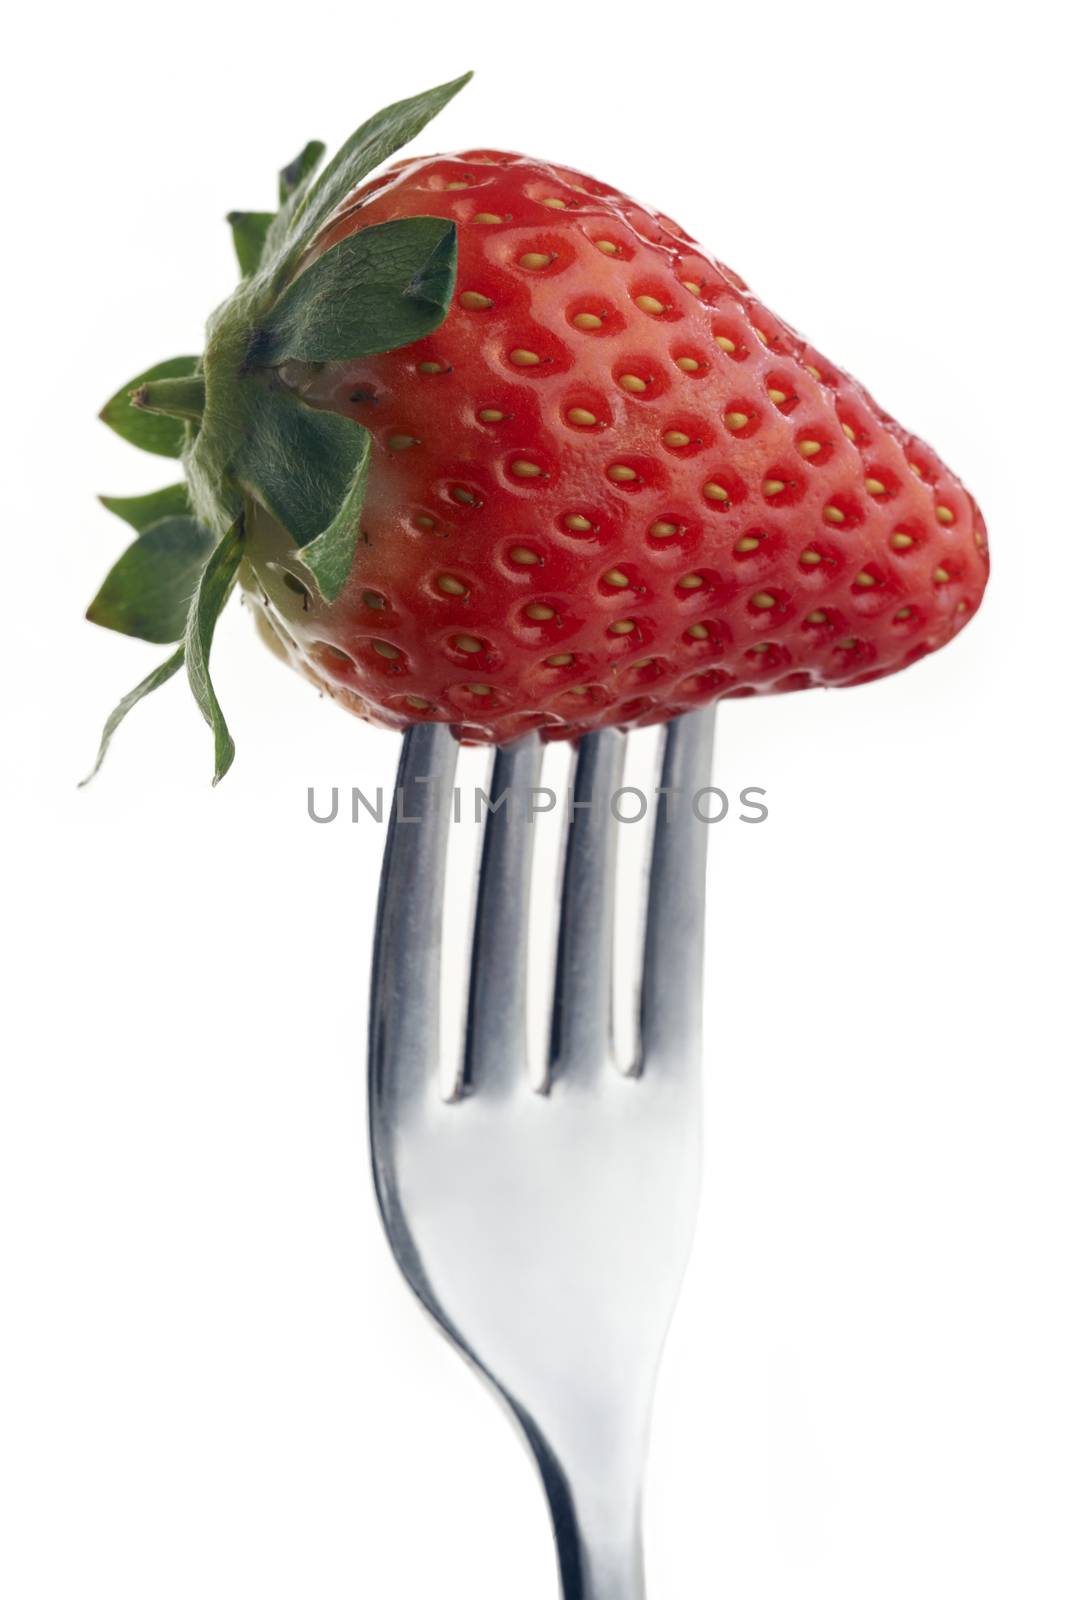 Strawberry on fork by gemphotography